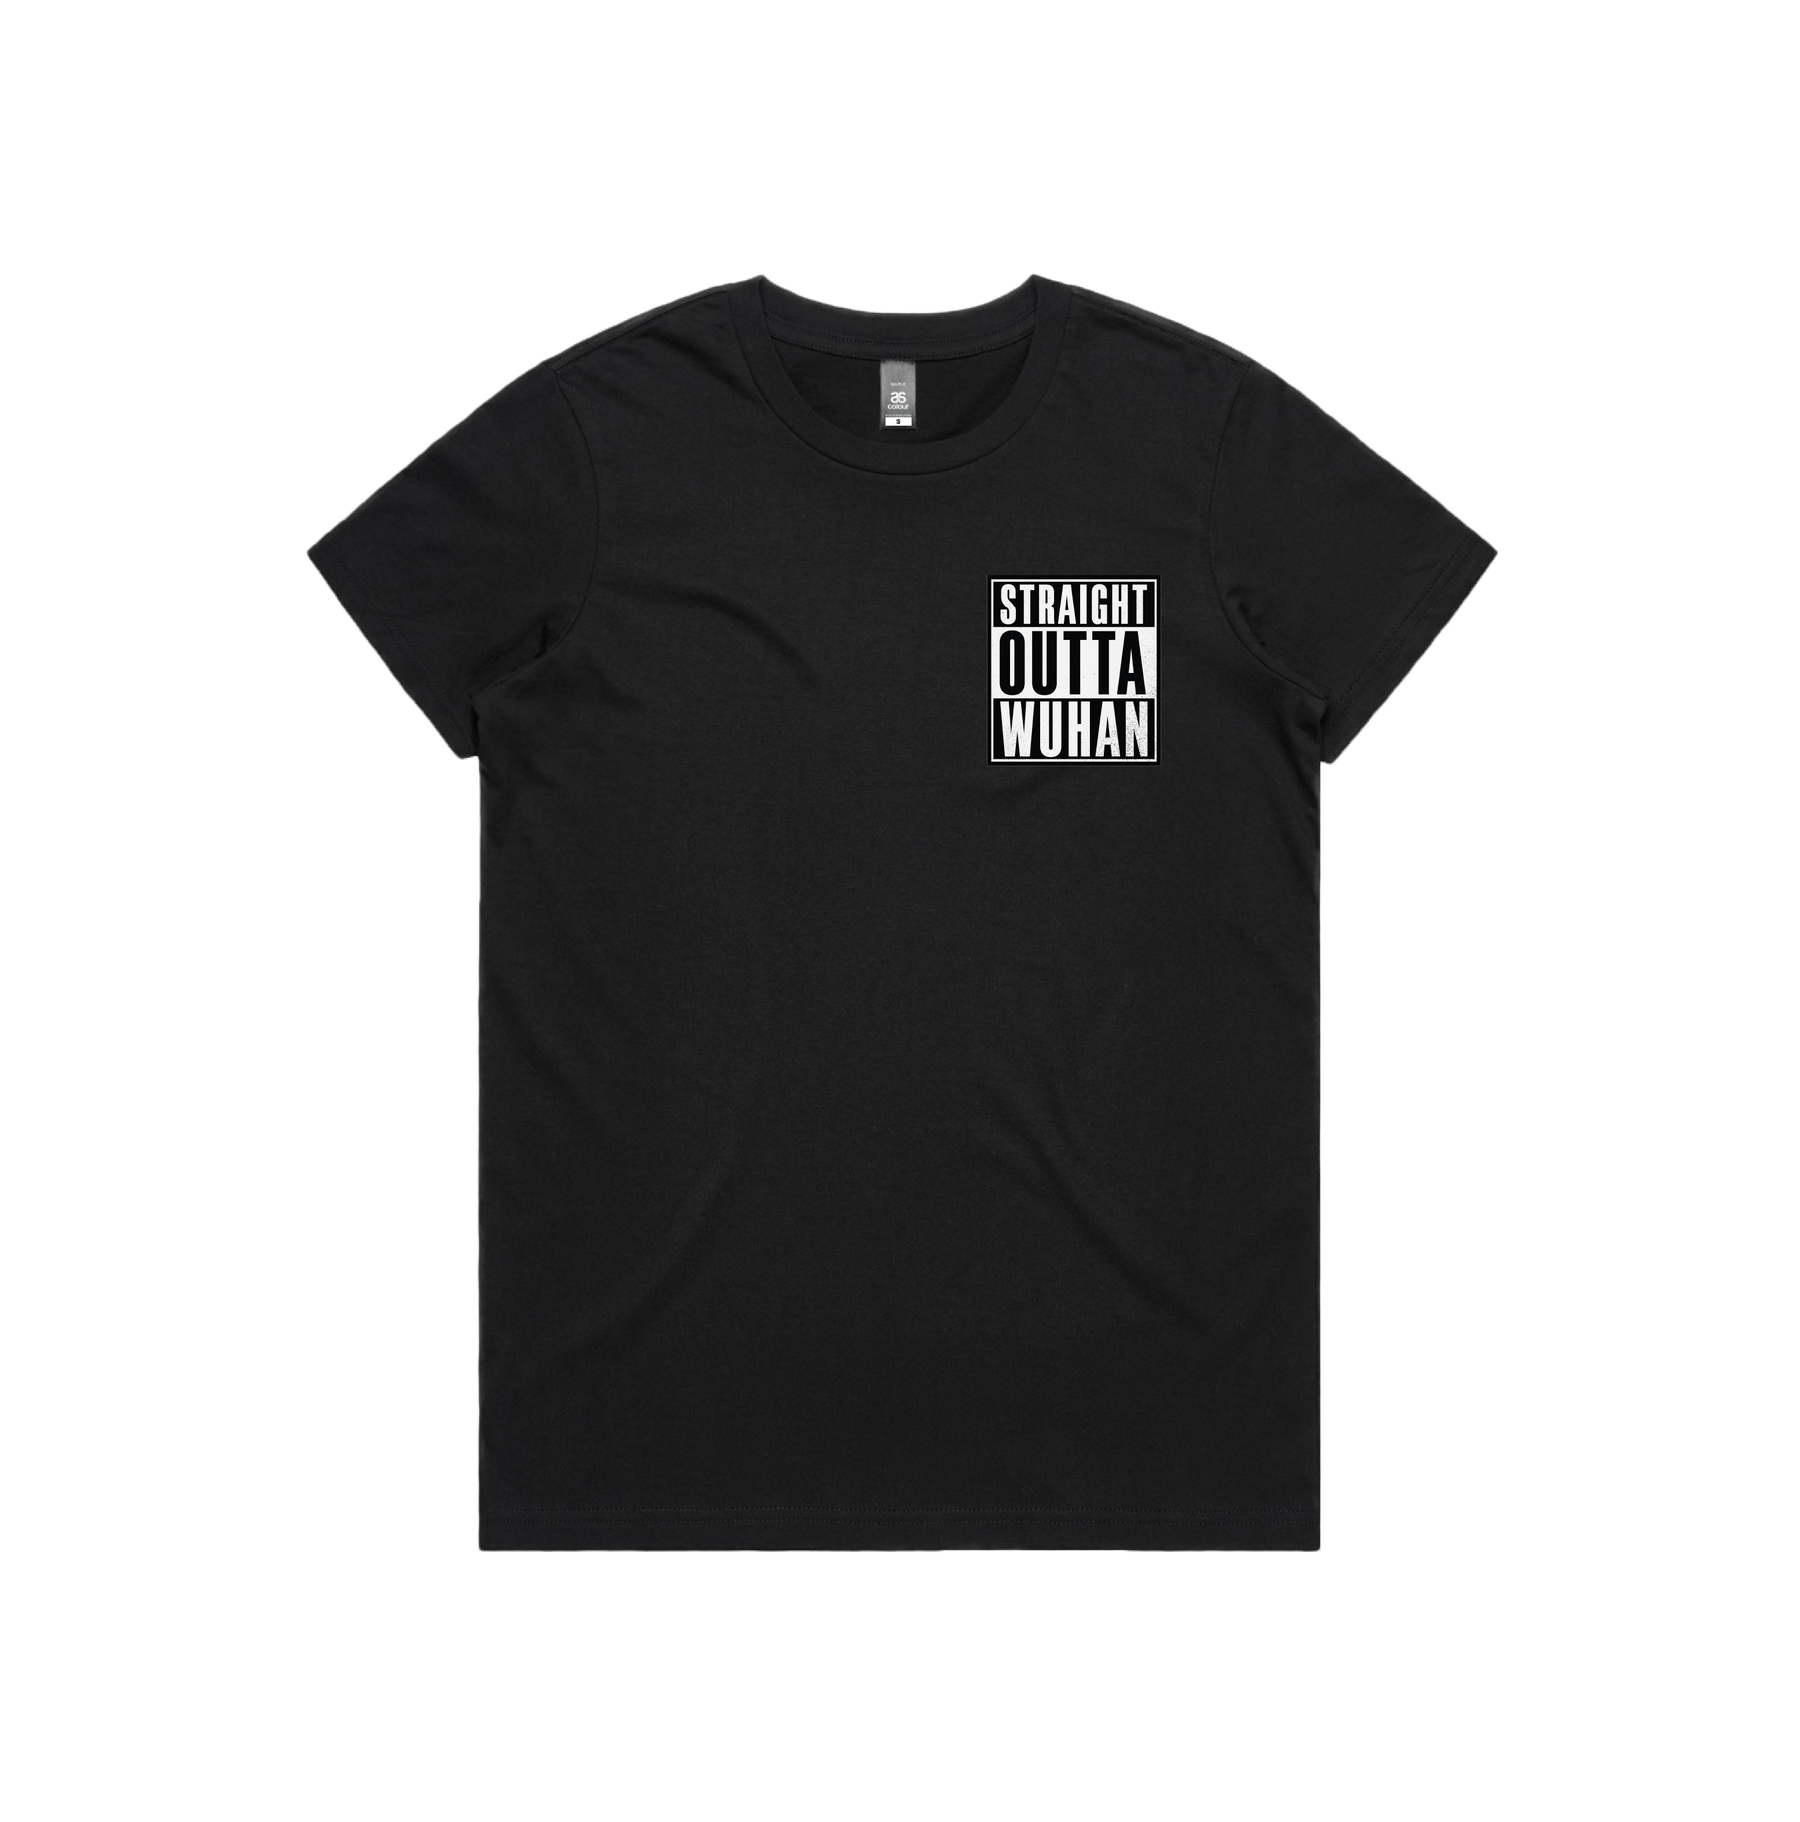 XS / Black / Small Front Design Straight Outta Wuhan ✊🏾 - Women's T Shirt